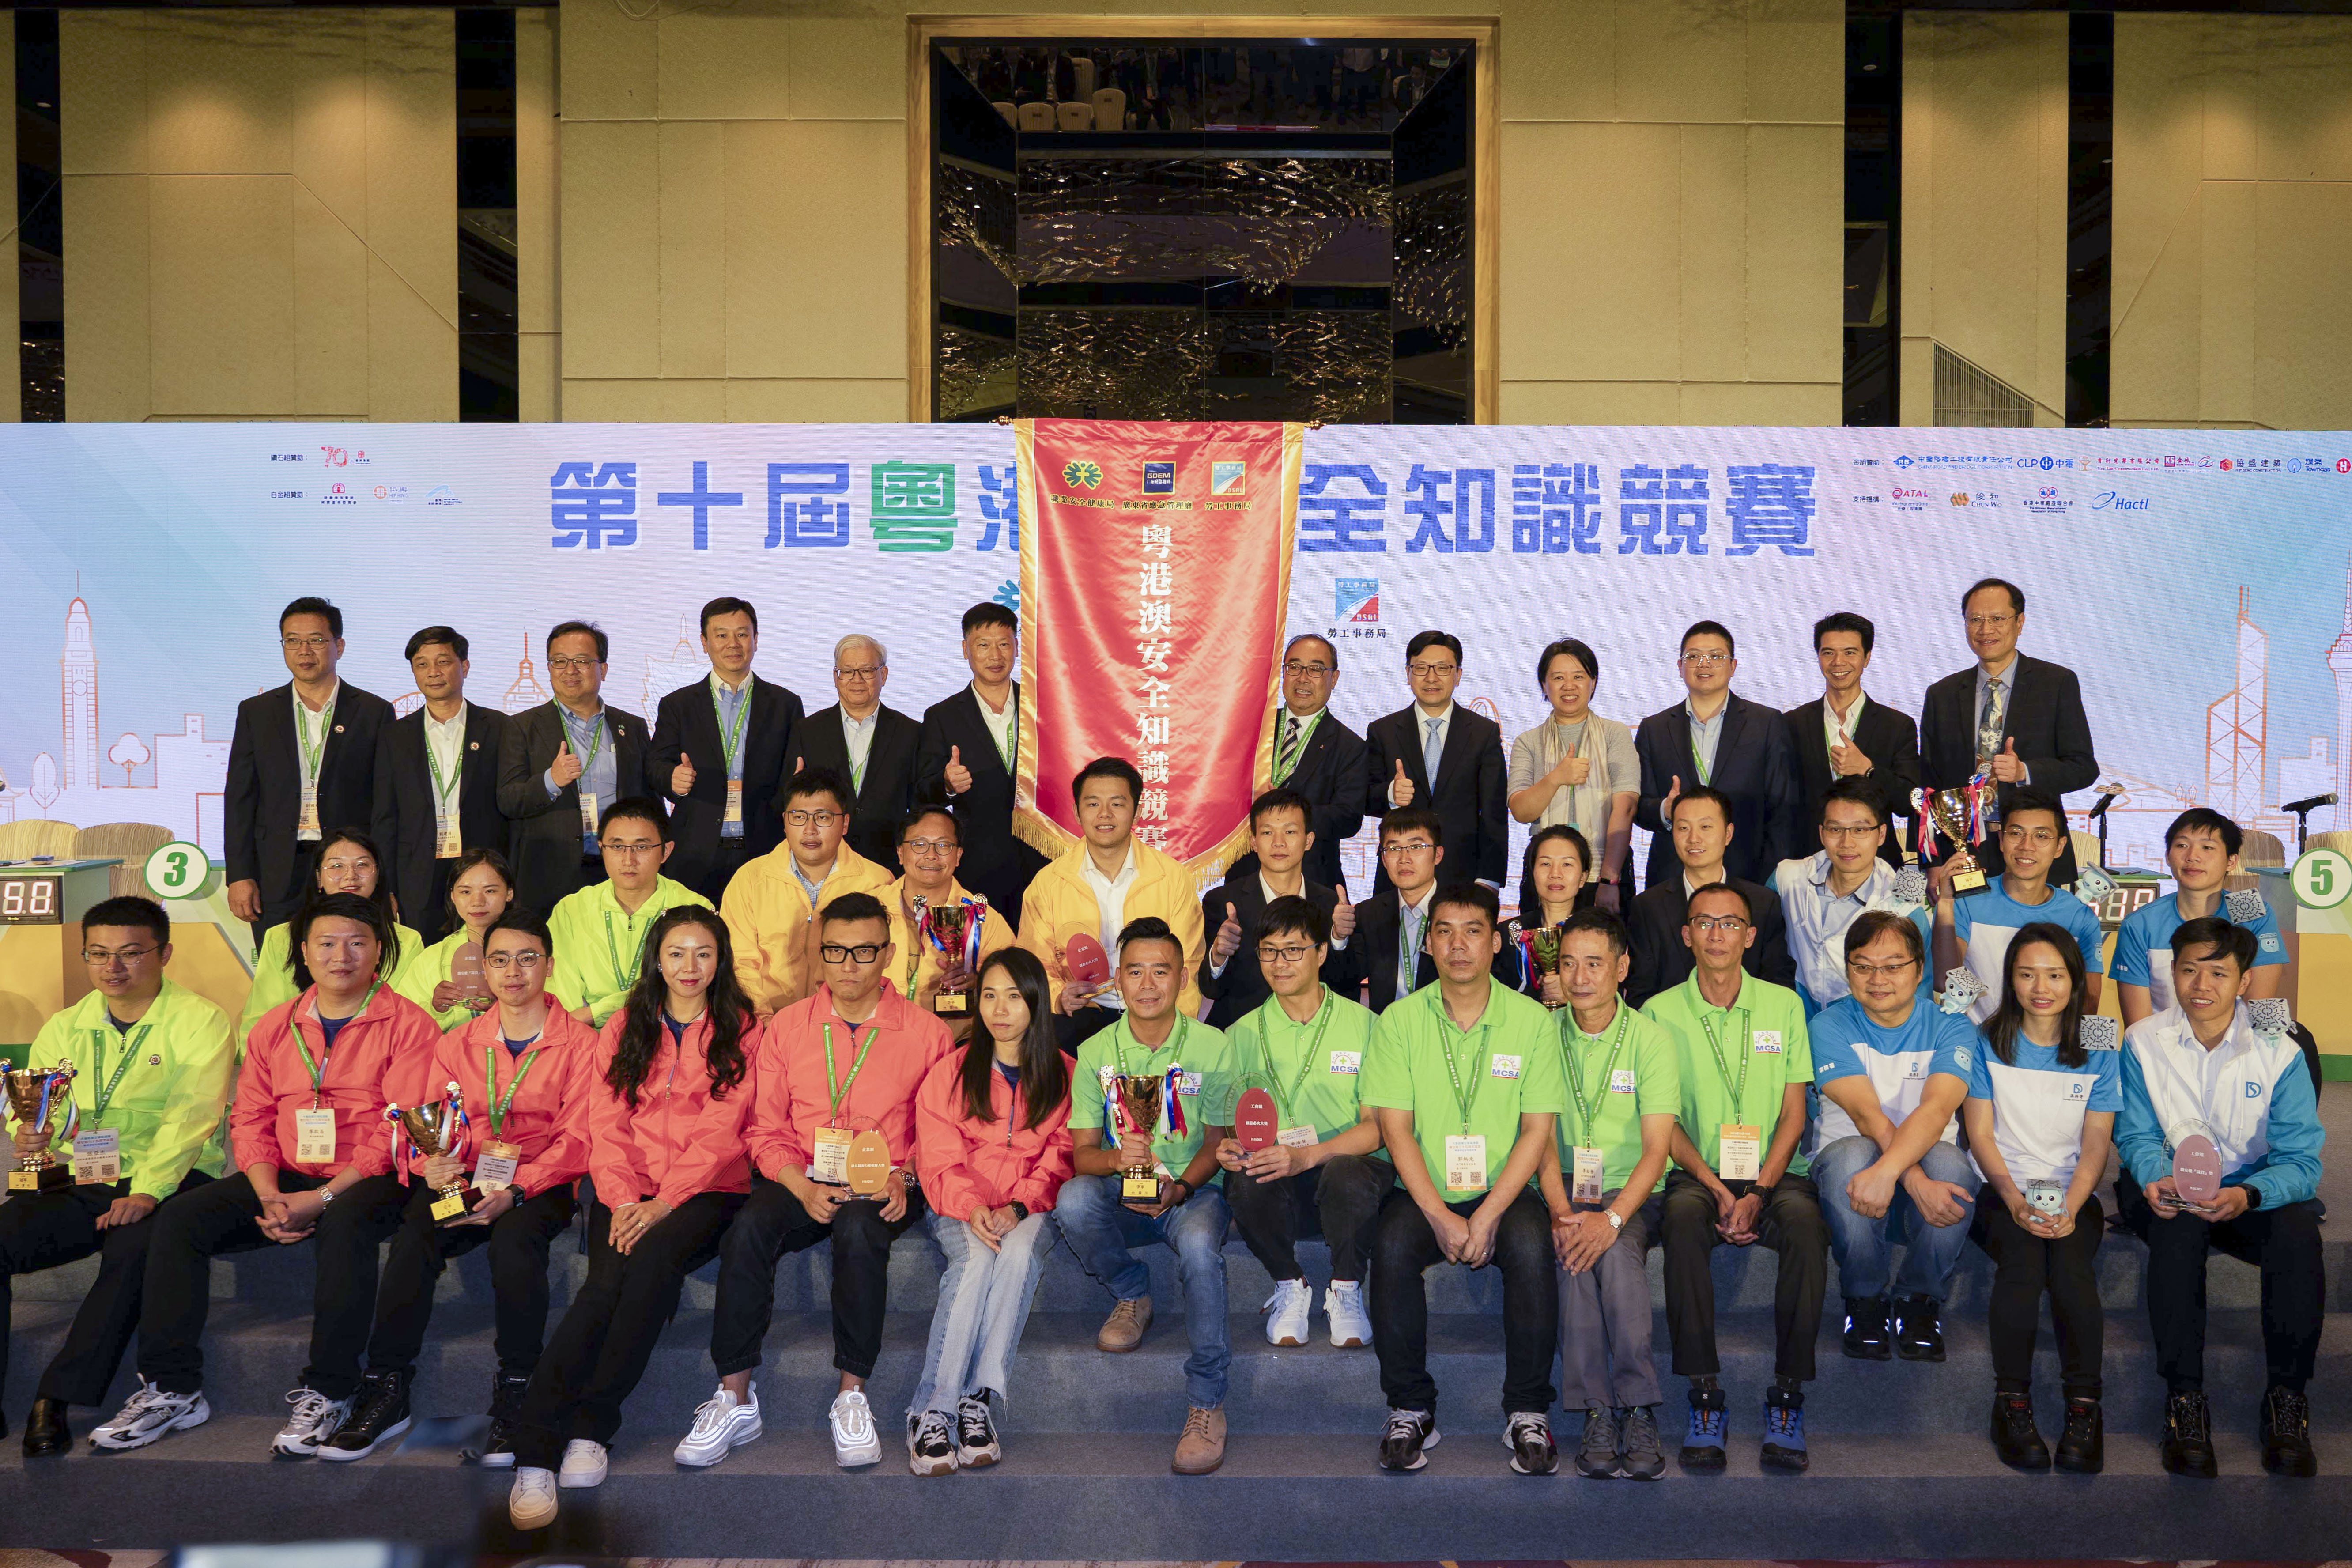 Photo 1: The OSHC of Hong Kong relayed to Department of Emergency Management of Guangdong Province as the flag bearer for the next competition in a group photo with the competing teams.